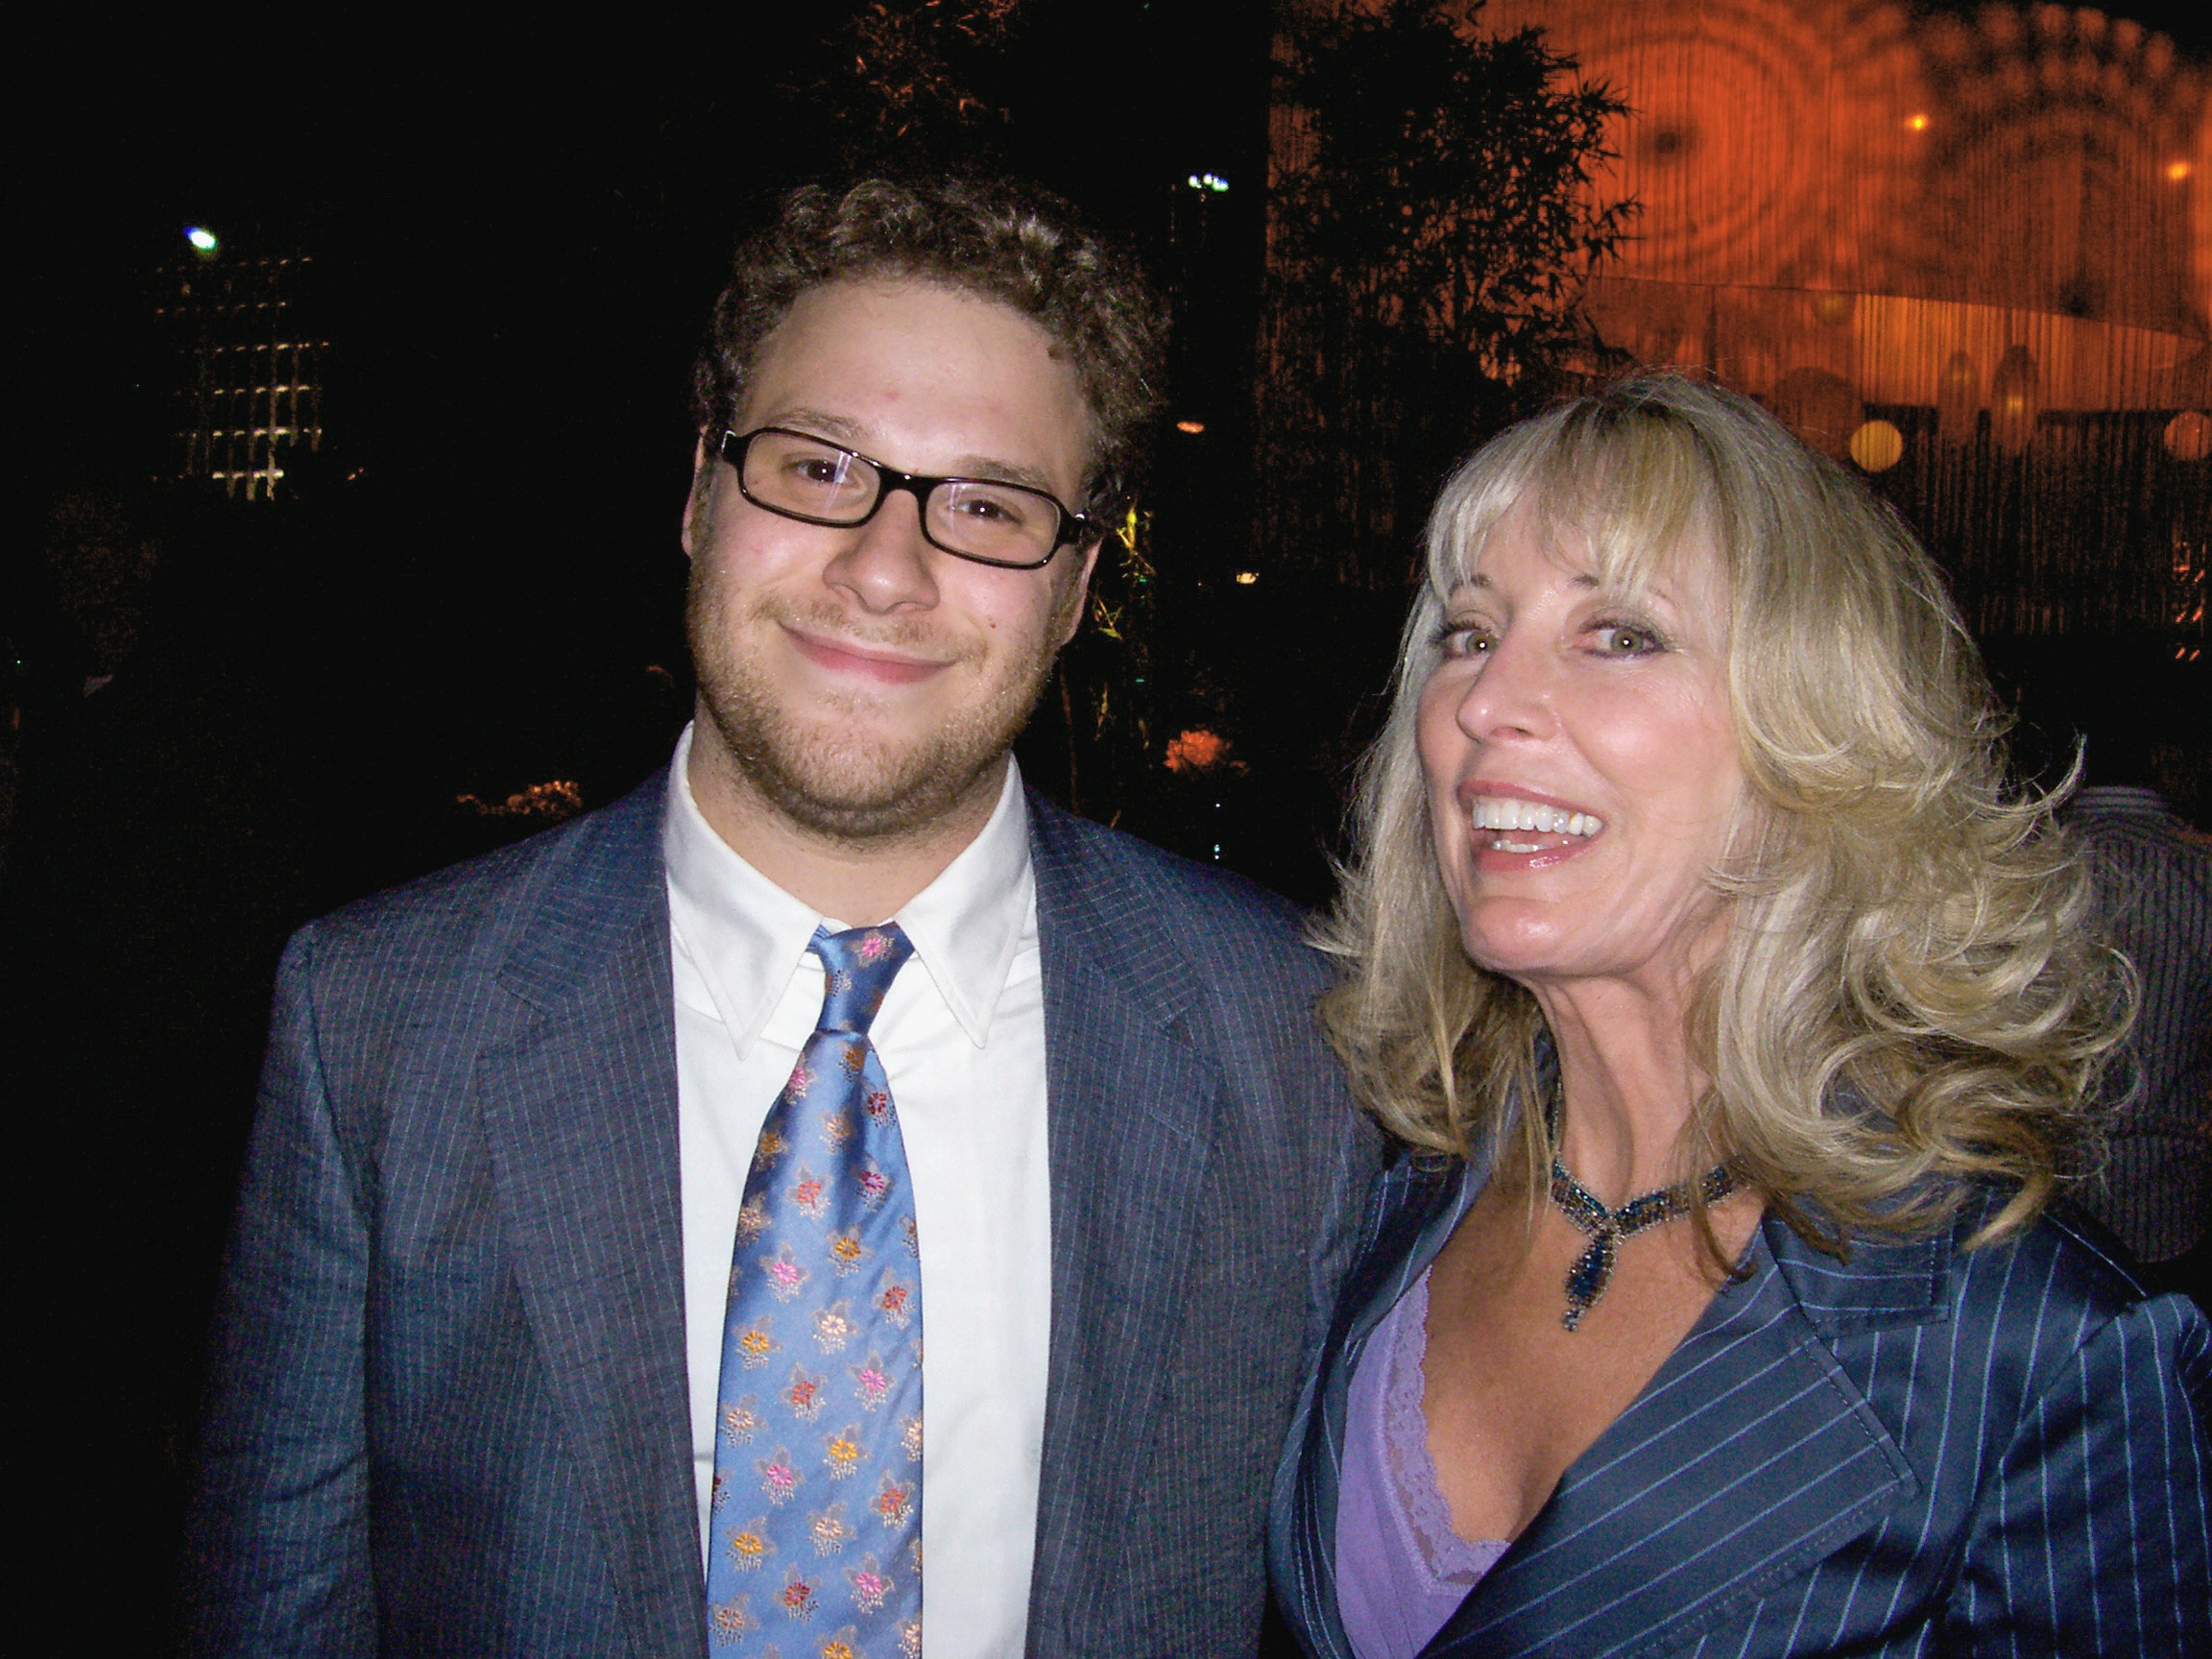 Jean St. James with Seth Rogen at Premiere of 